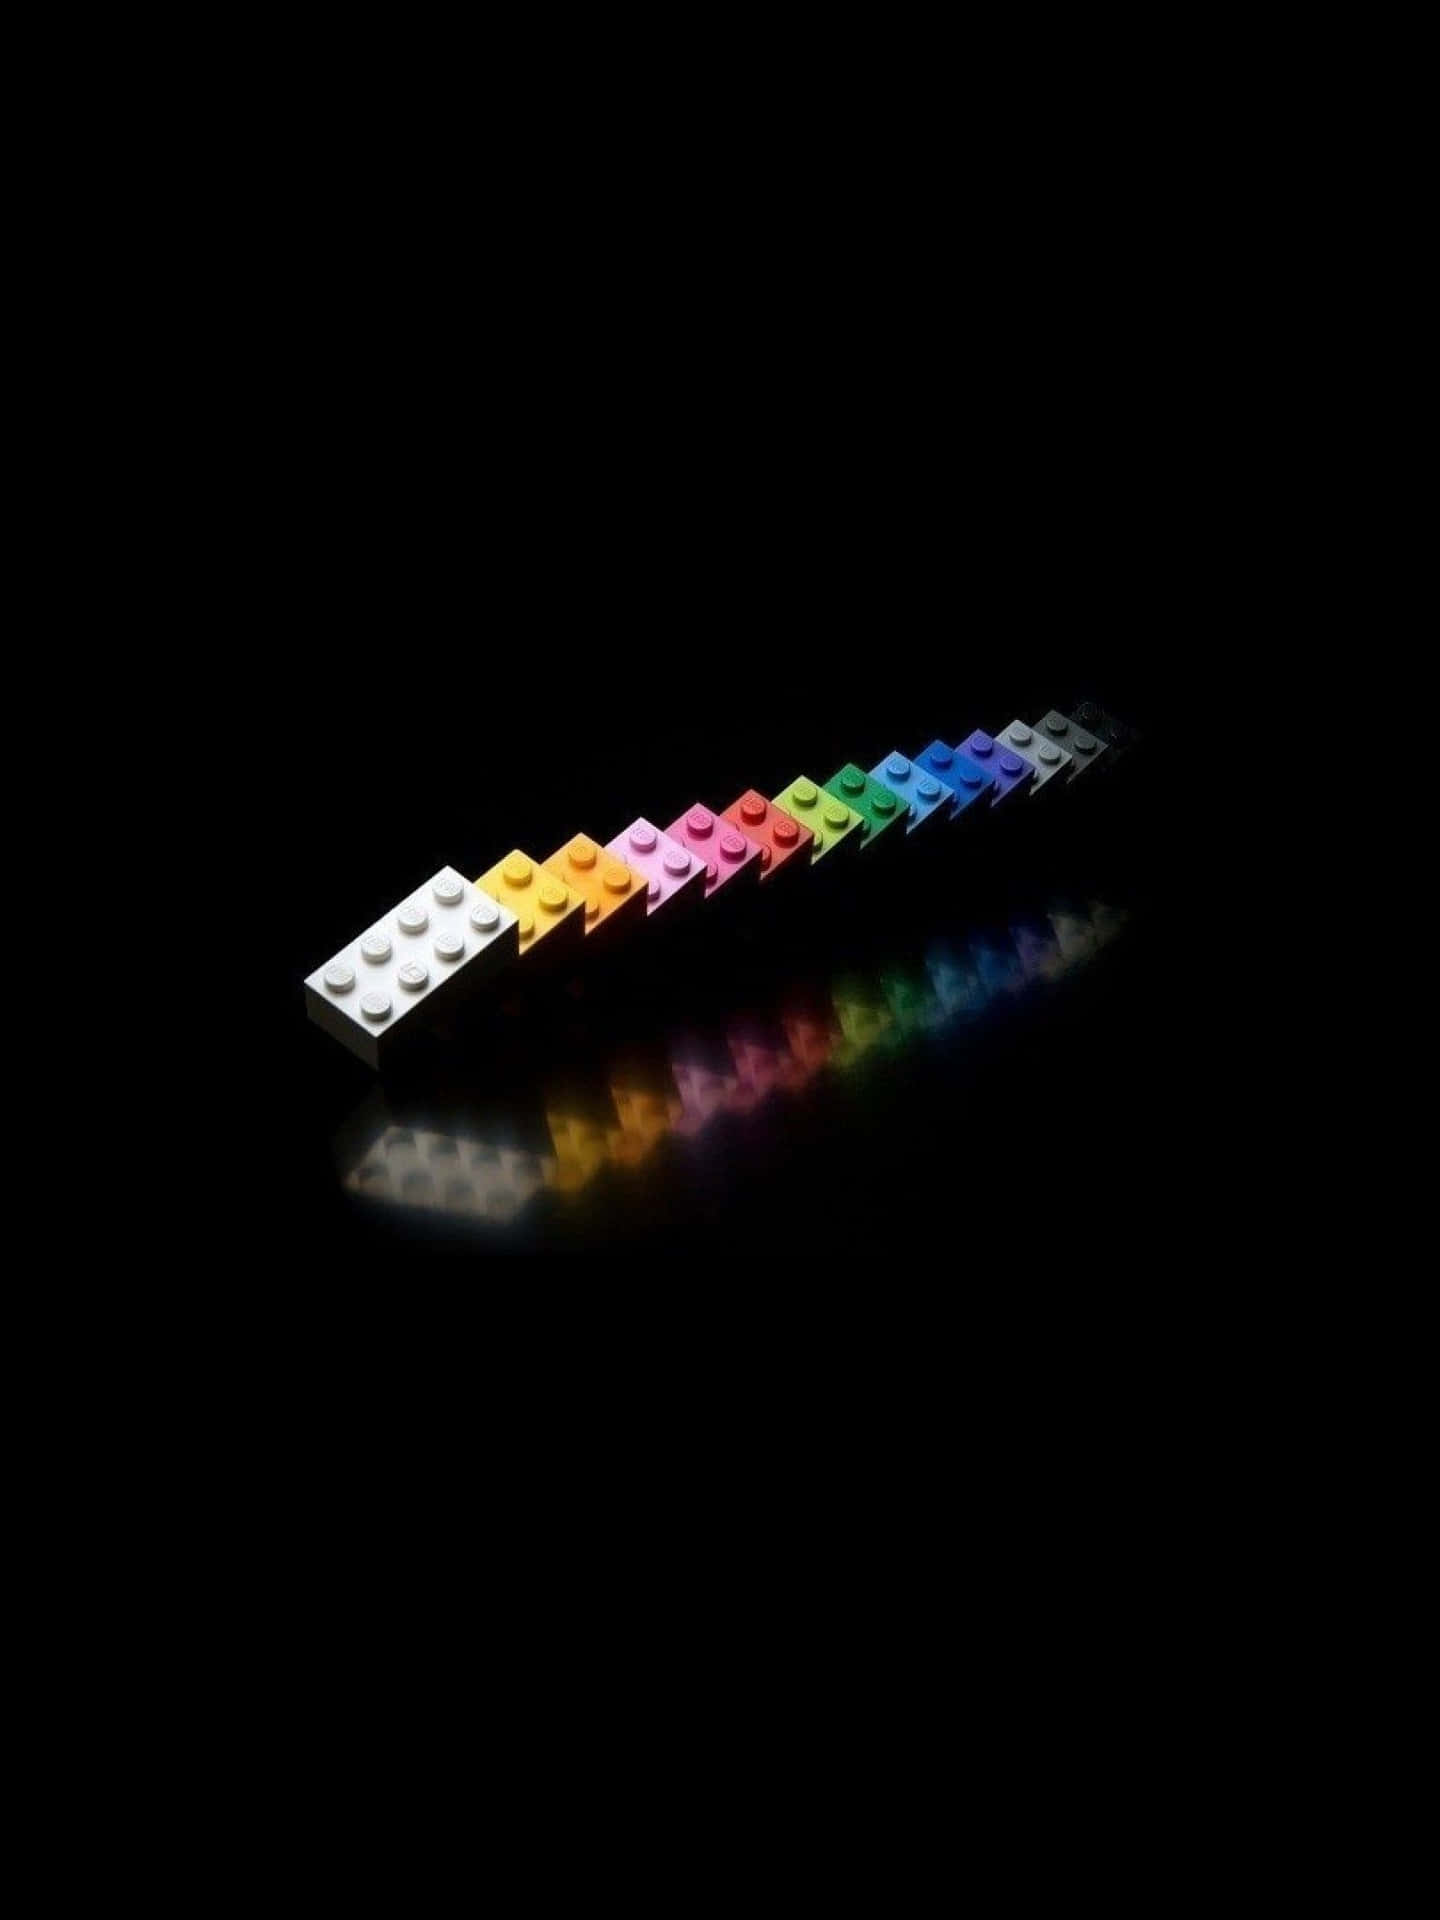 Black Ipad With Colorful Legos With Reflection Wallpaper